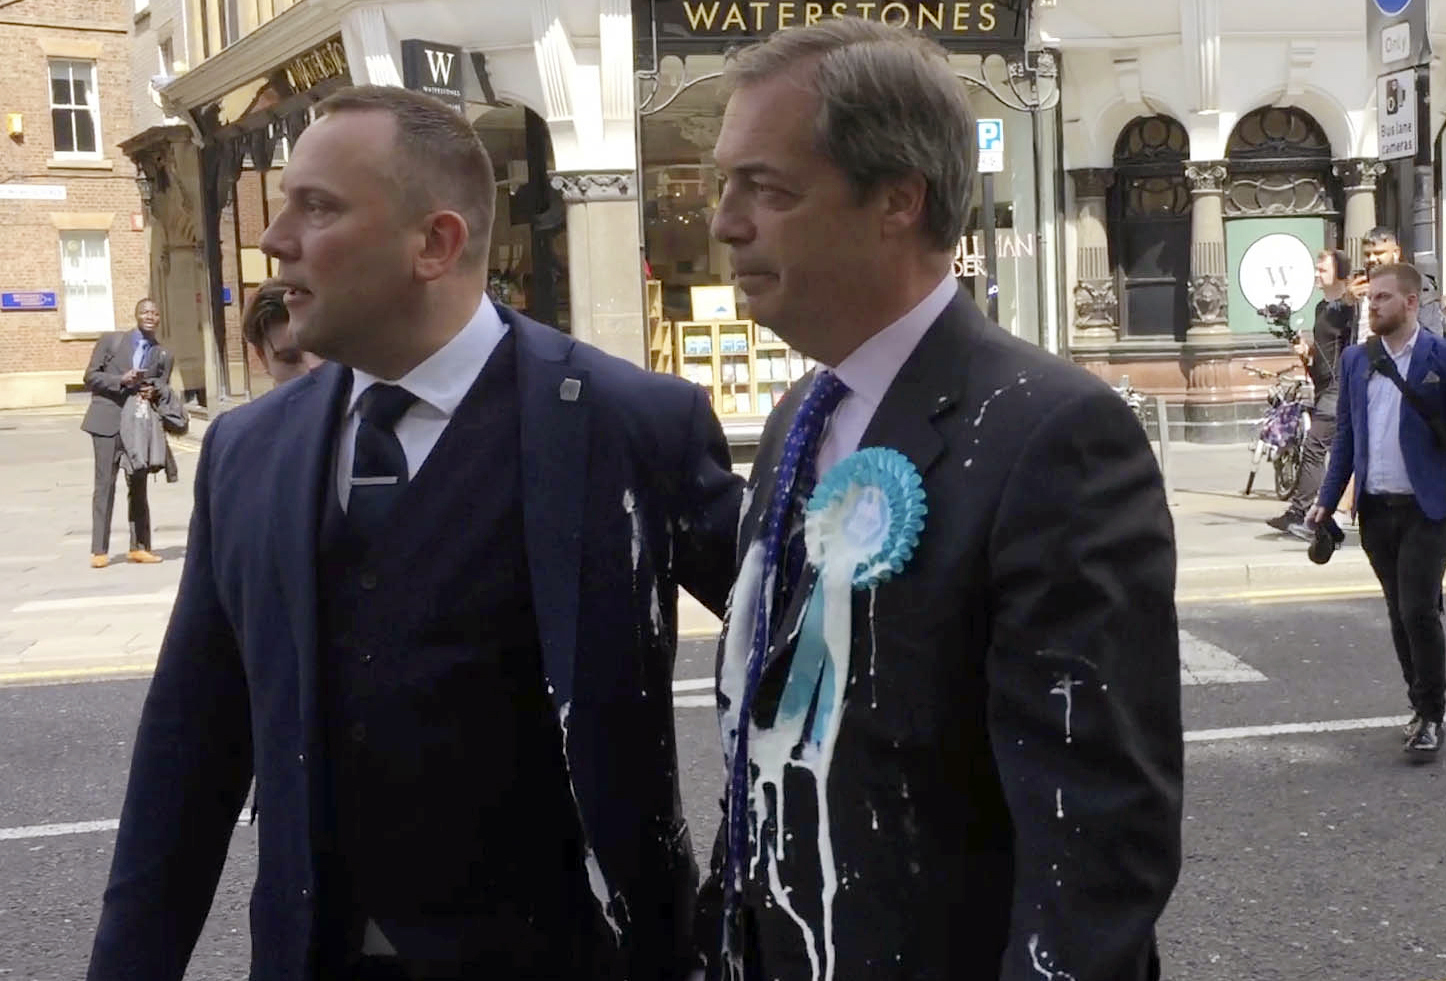 Man Arrested and Charged with Assault After Throwing Milkshake at Politician